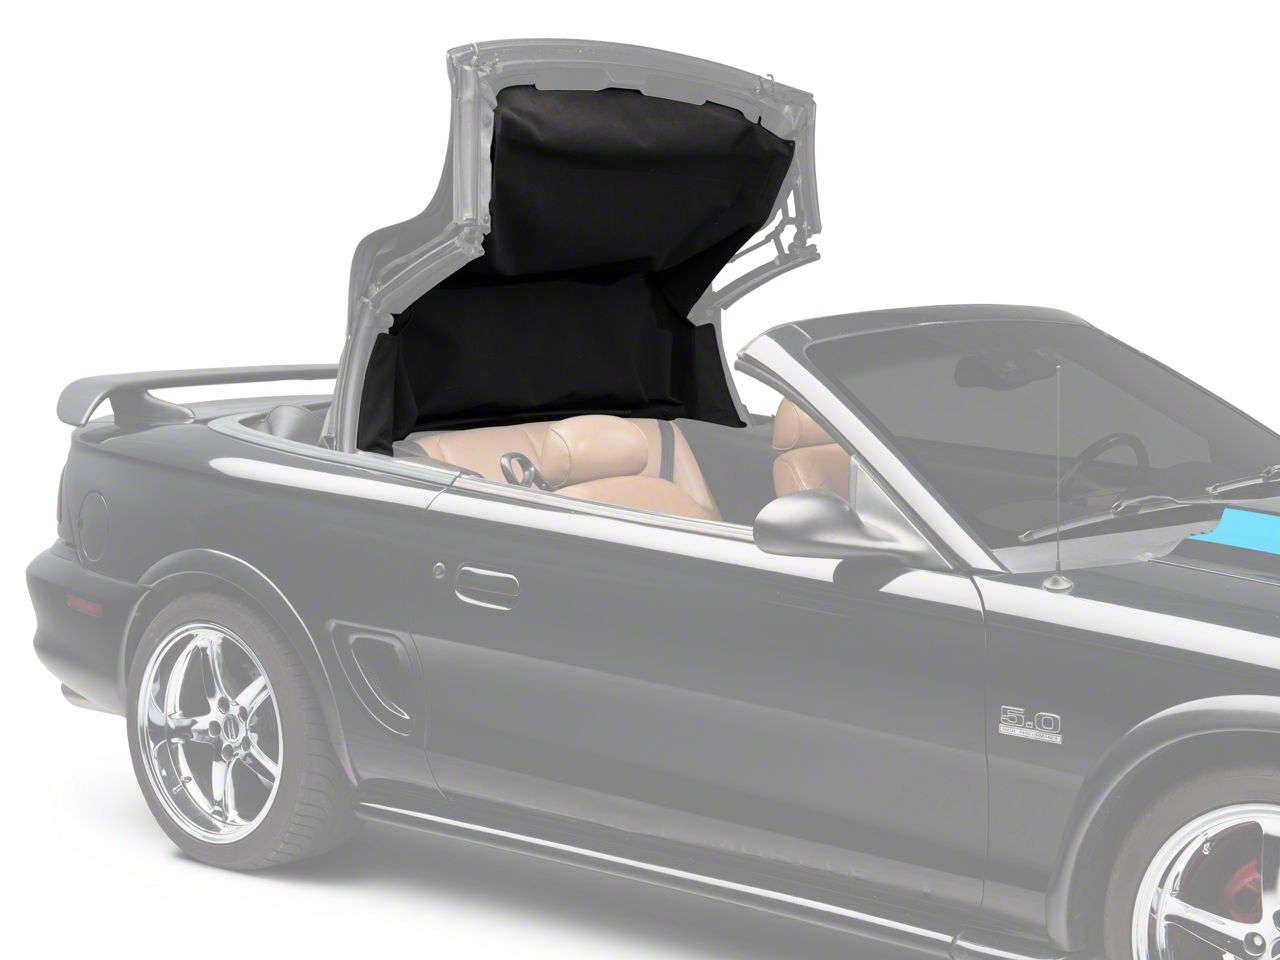 98 Ford mustang convertible top replacement #3